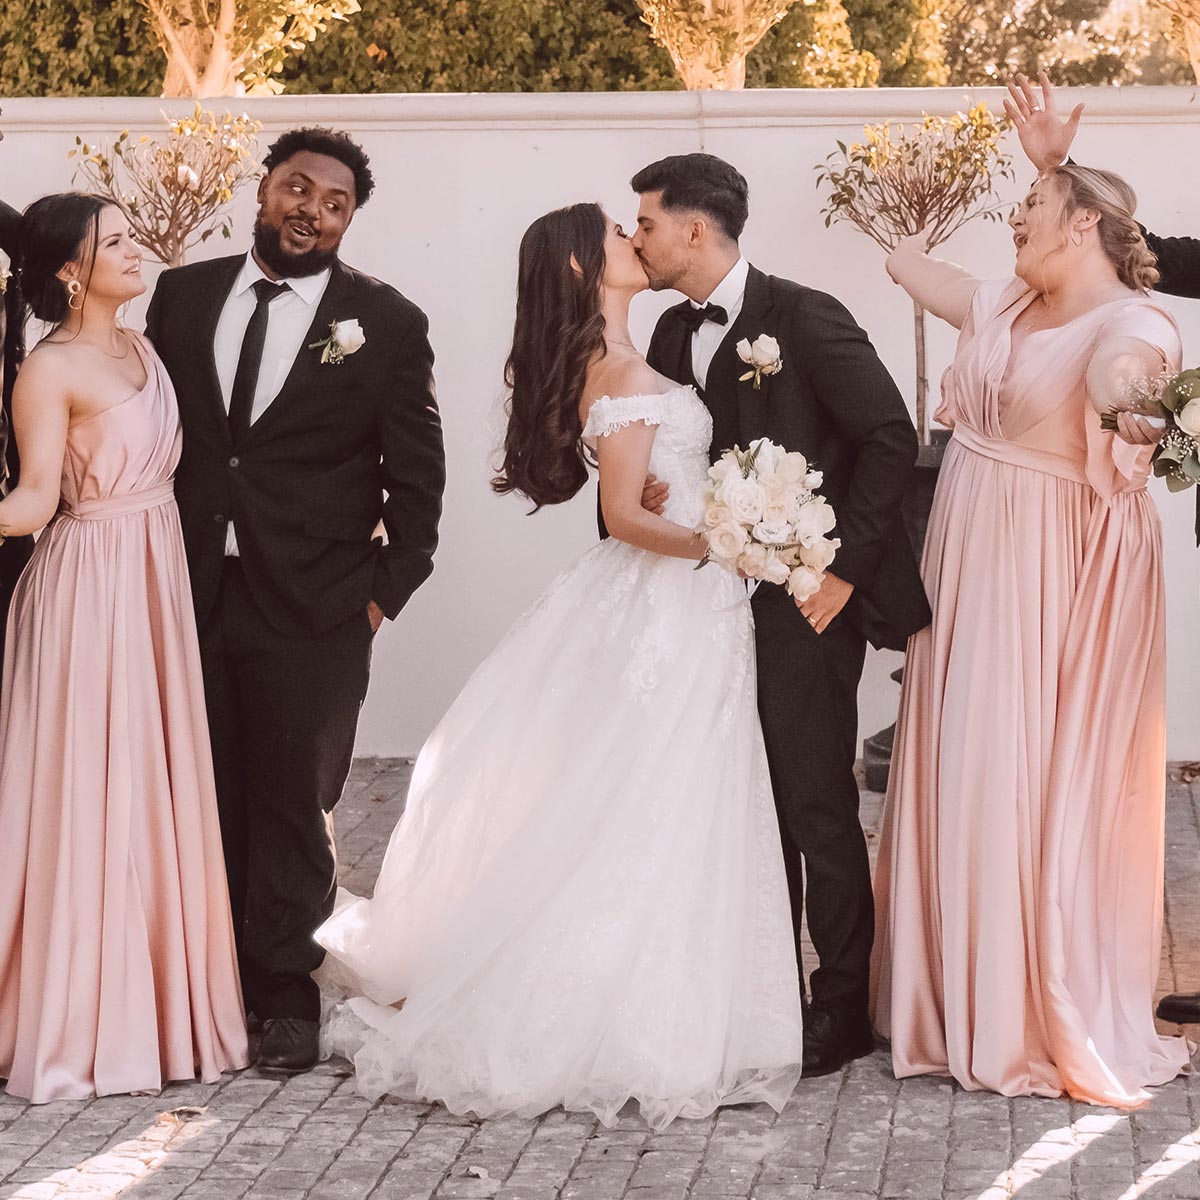 Bride and groom, Emilio and Carmen, share a kiss surrounded by their joyful bridesmaids and groomsman in elegant attire. Weddings. Fabulous Flowers and Gifts.